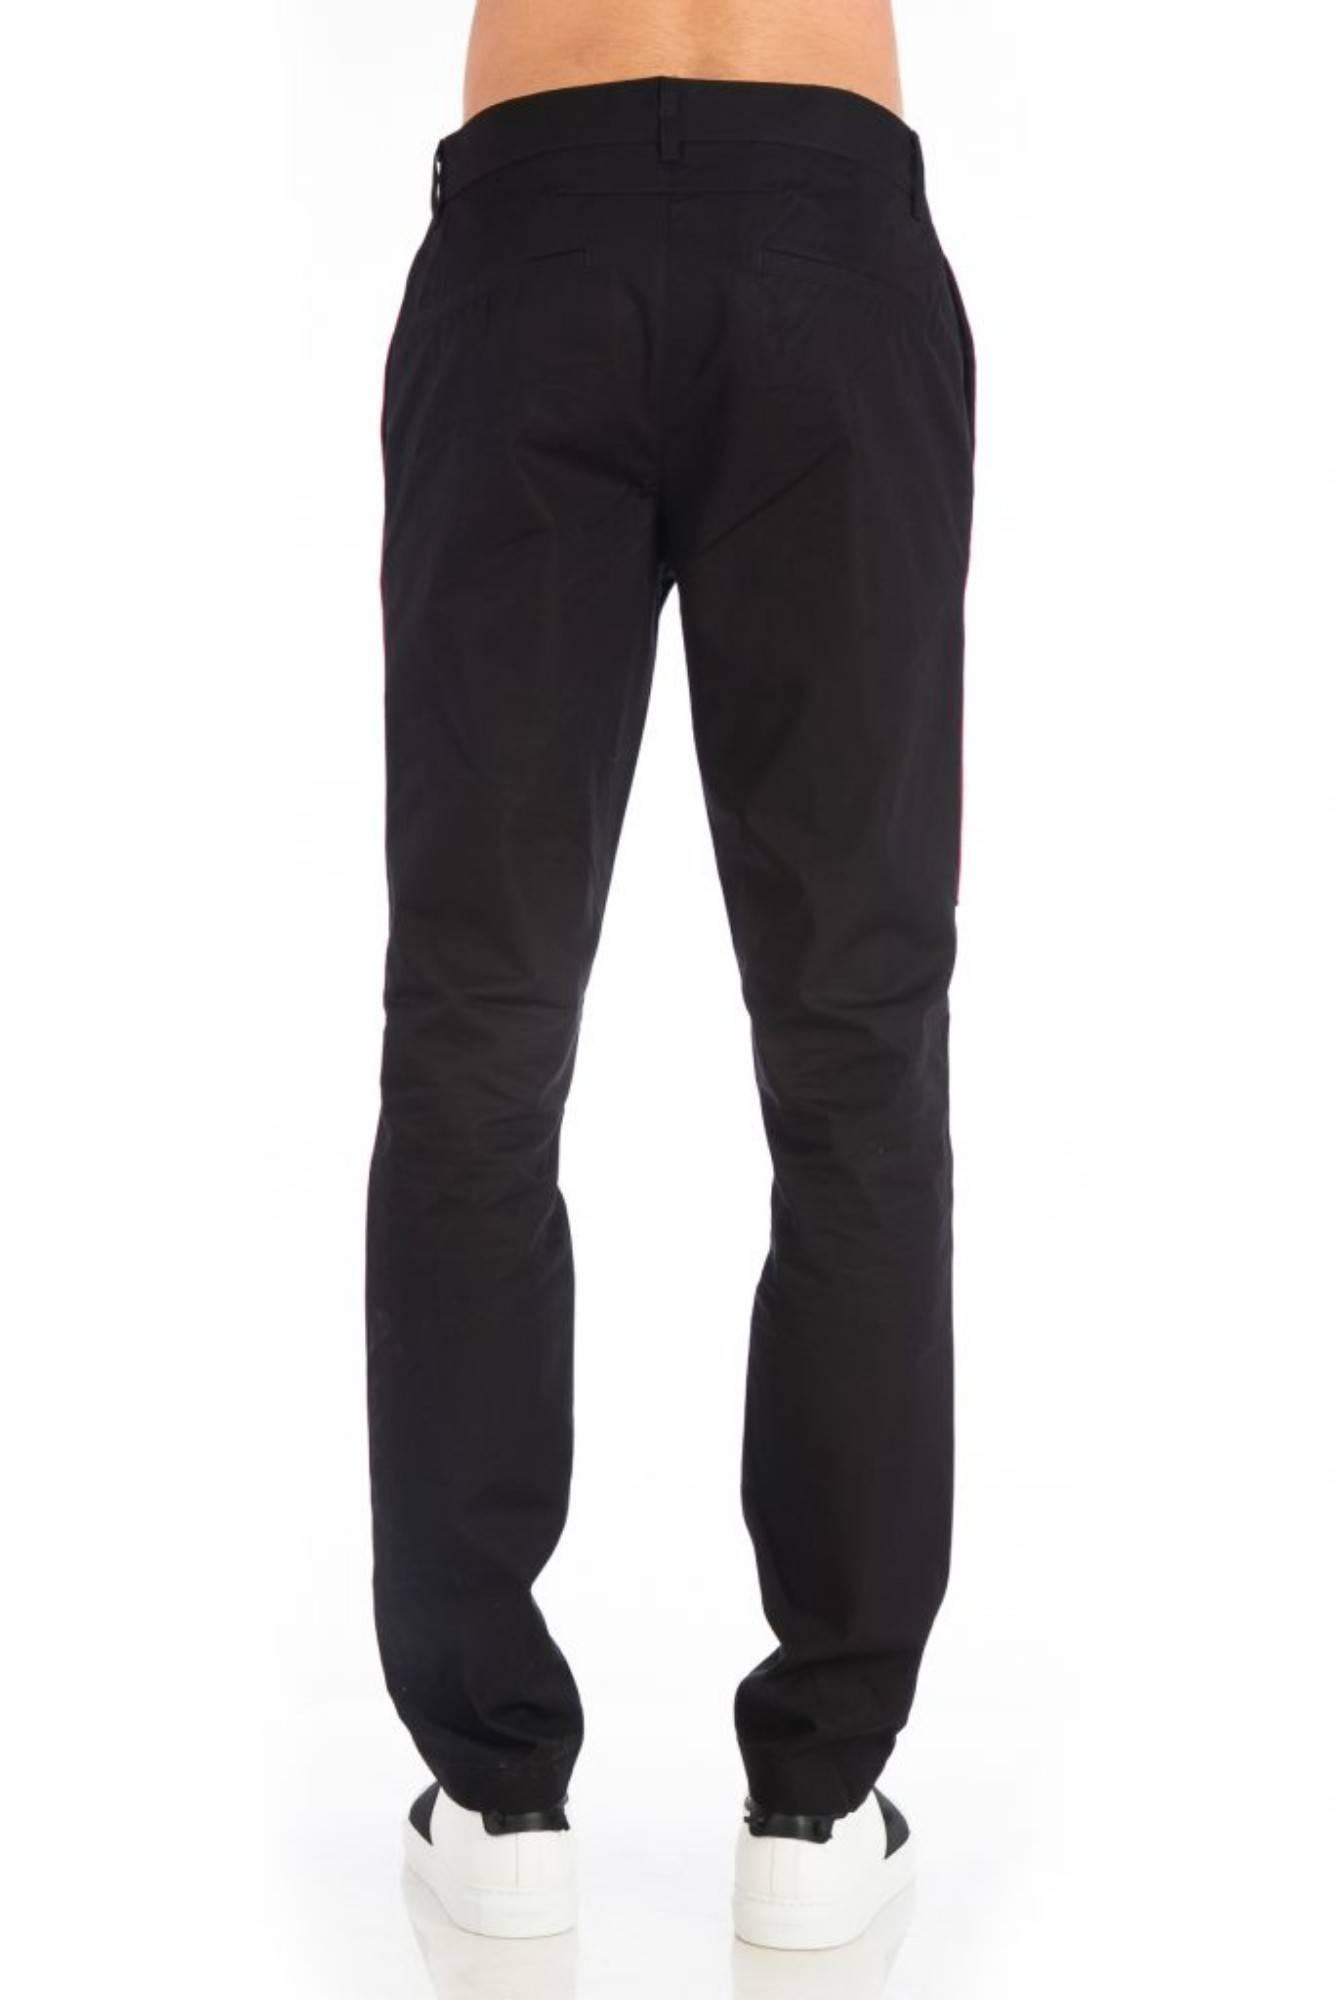 Black Givenchy Side Stripe Trousers (Size - 50) For Sale